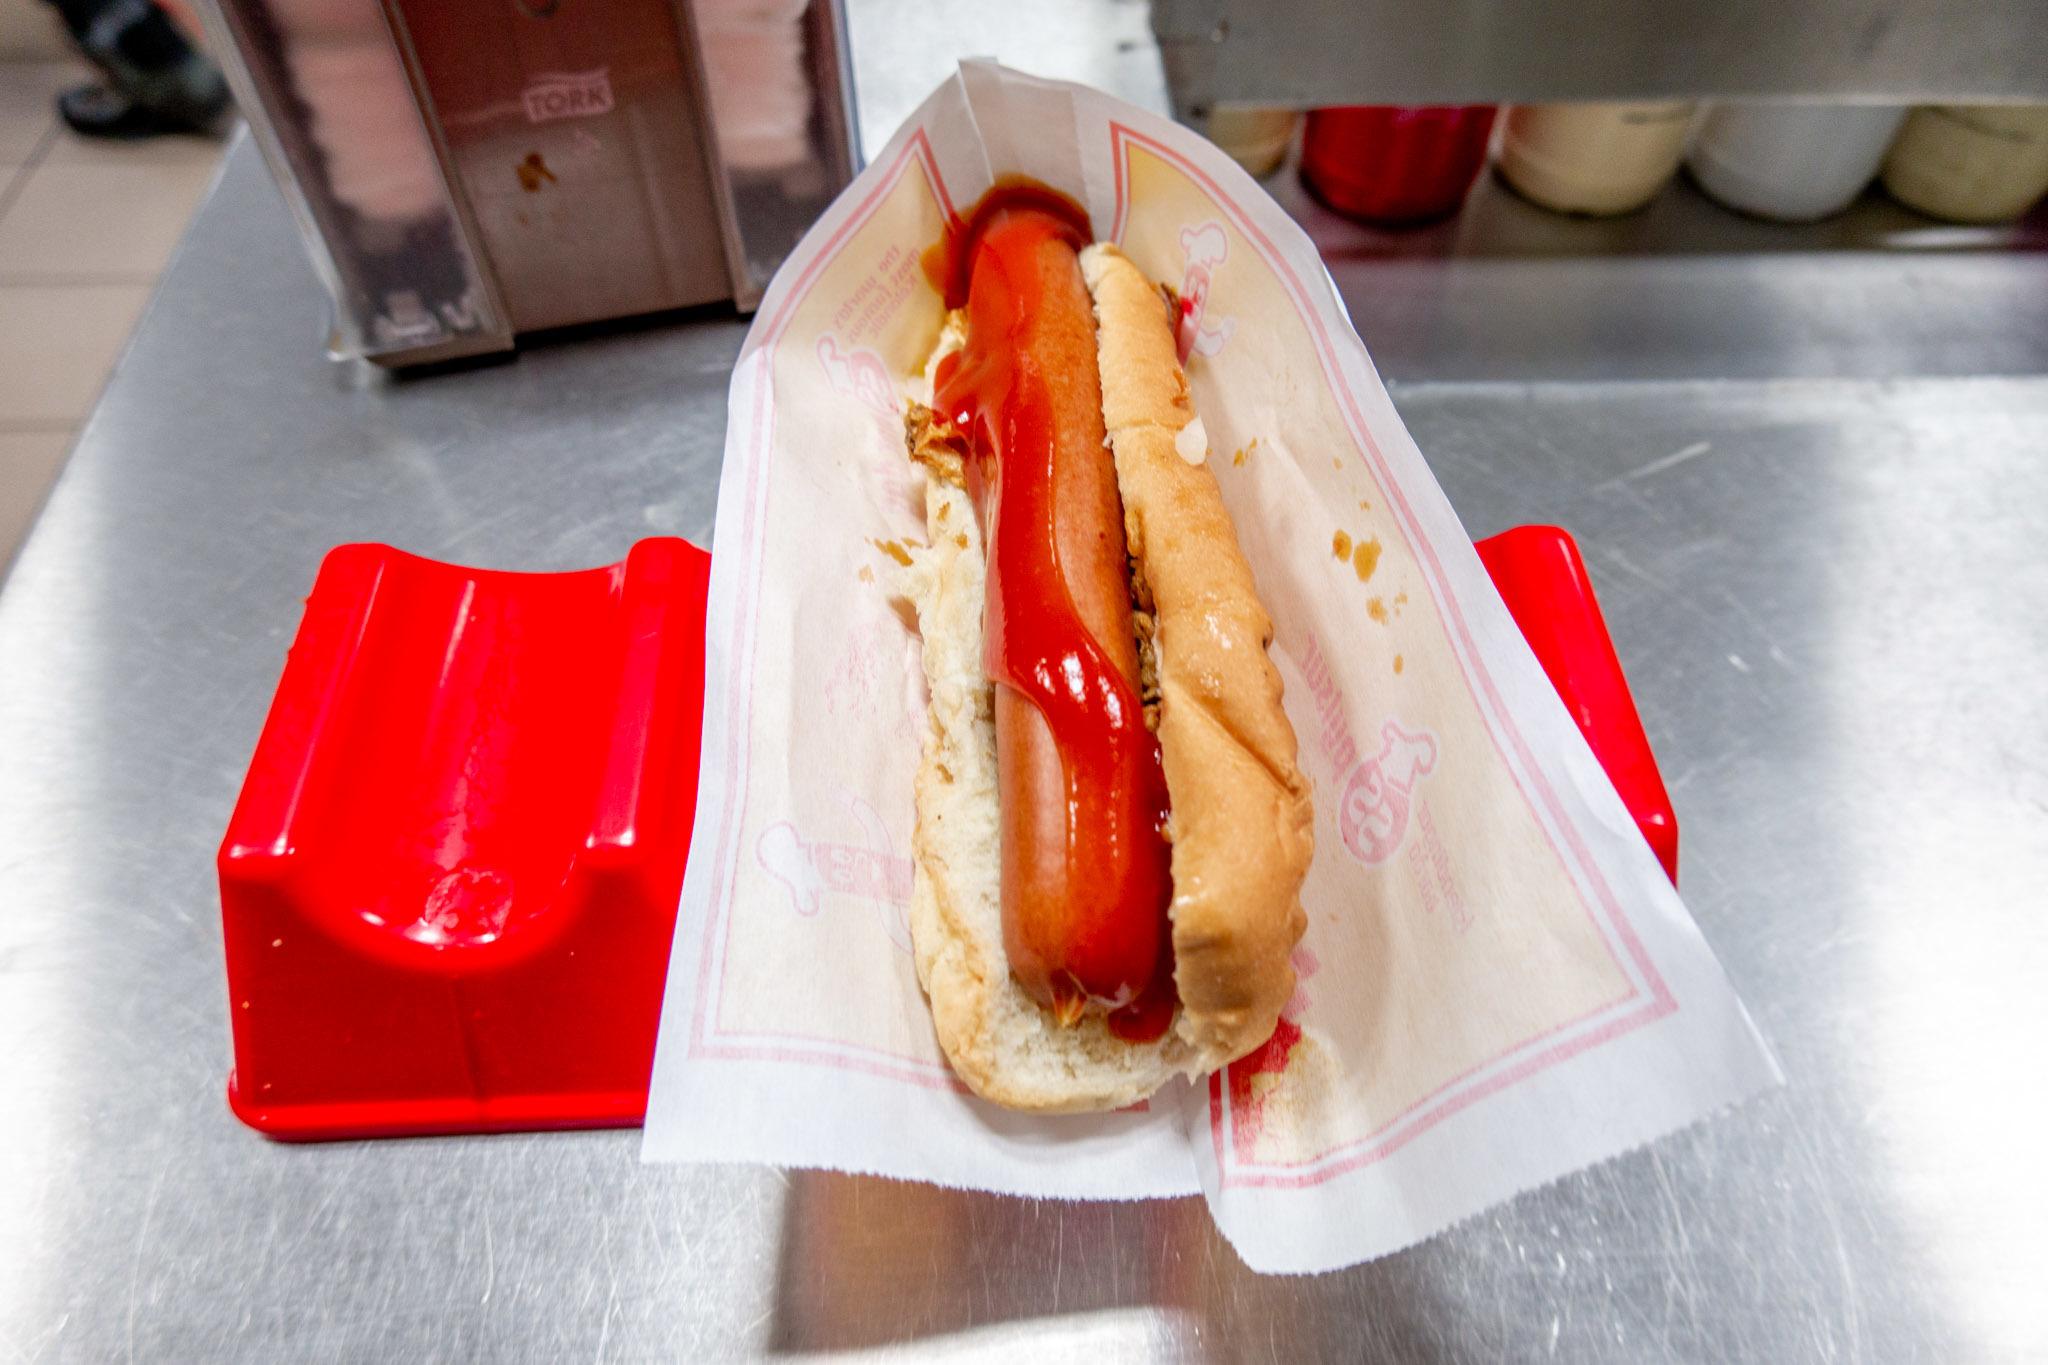 A hot dog in a paper wrapper with ketchup